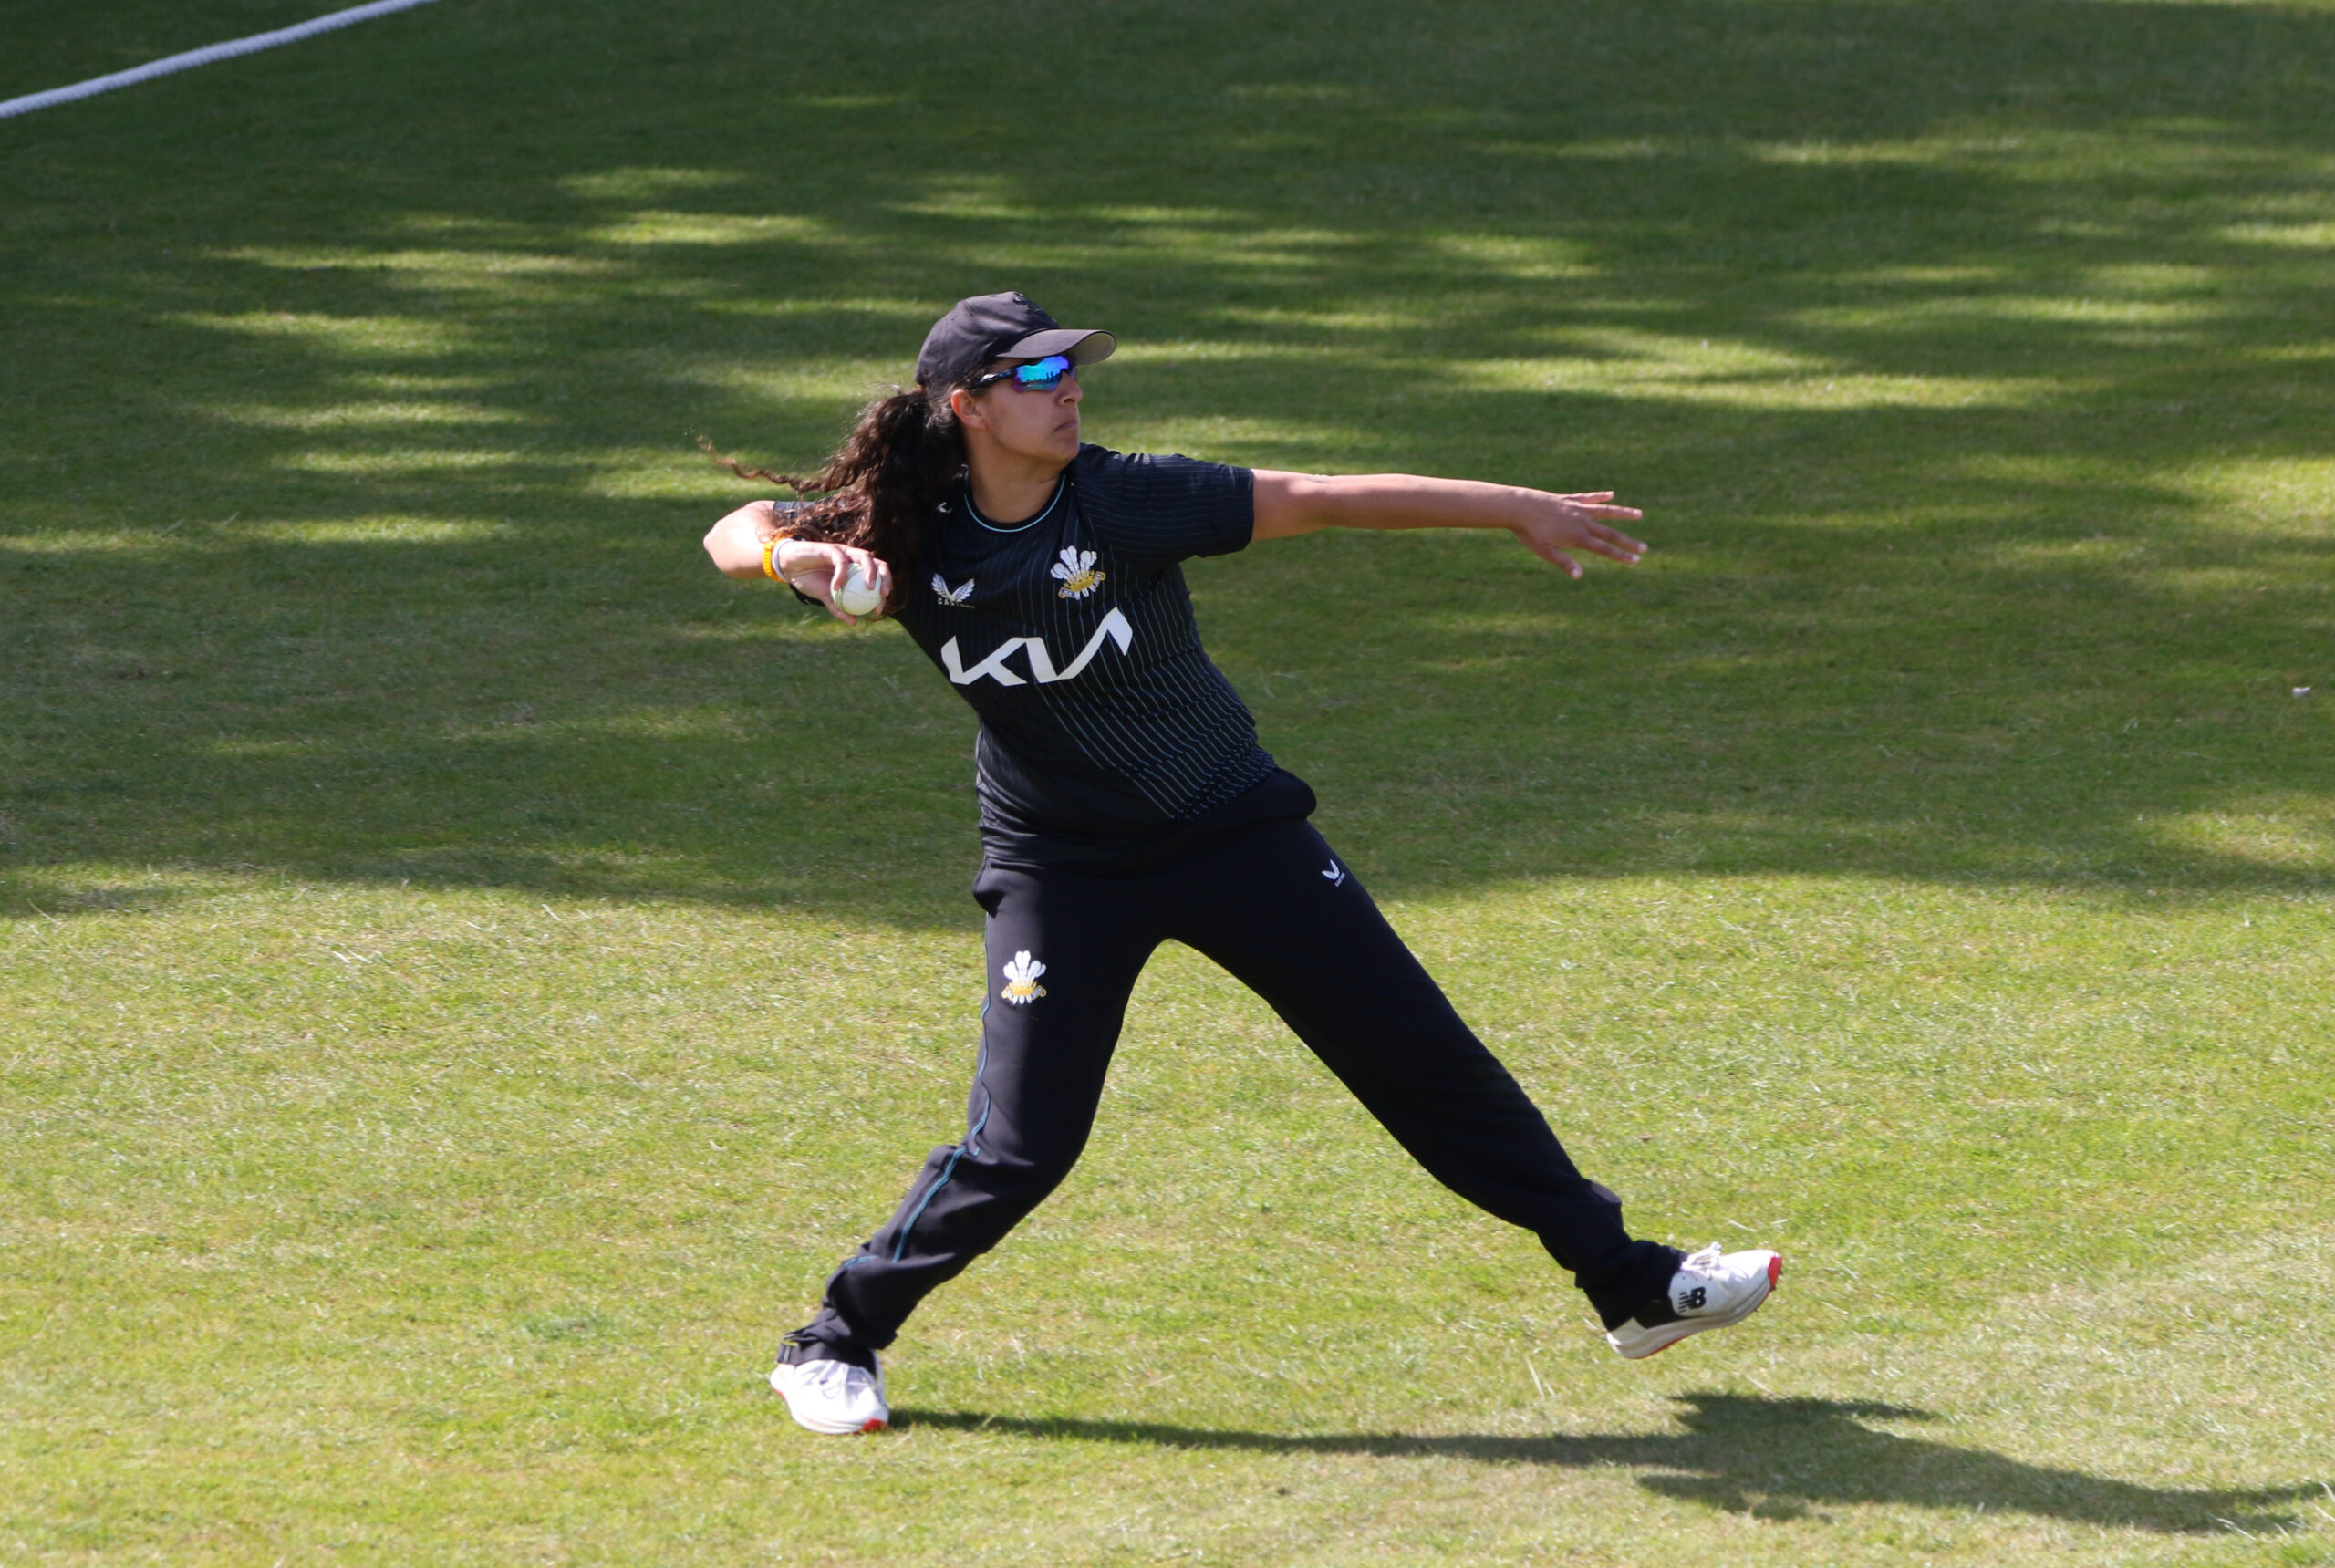 Surrey defeated narrowly by Sussex at Guildford